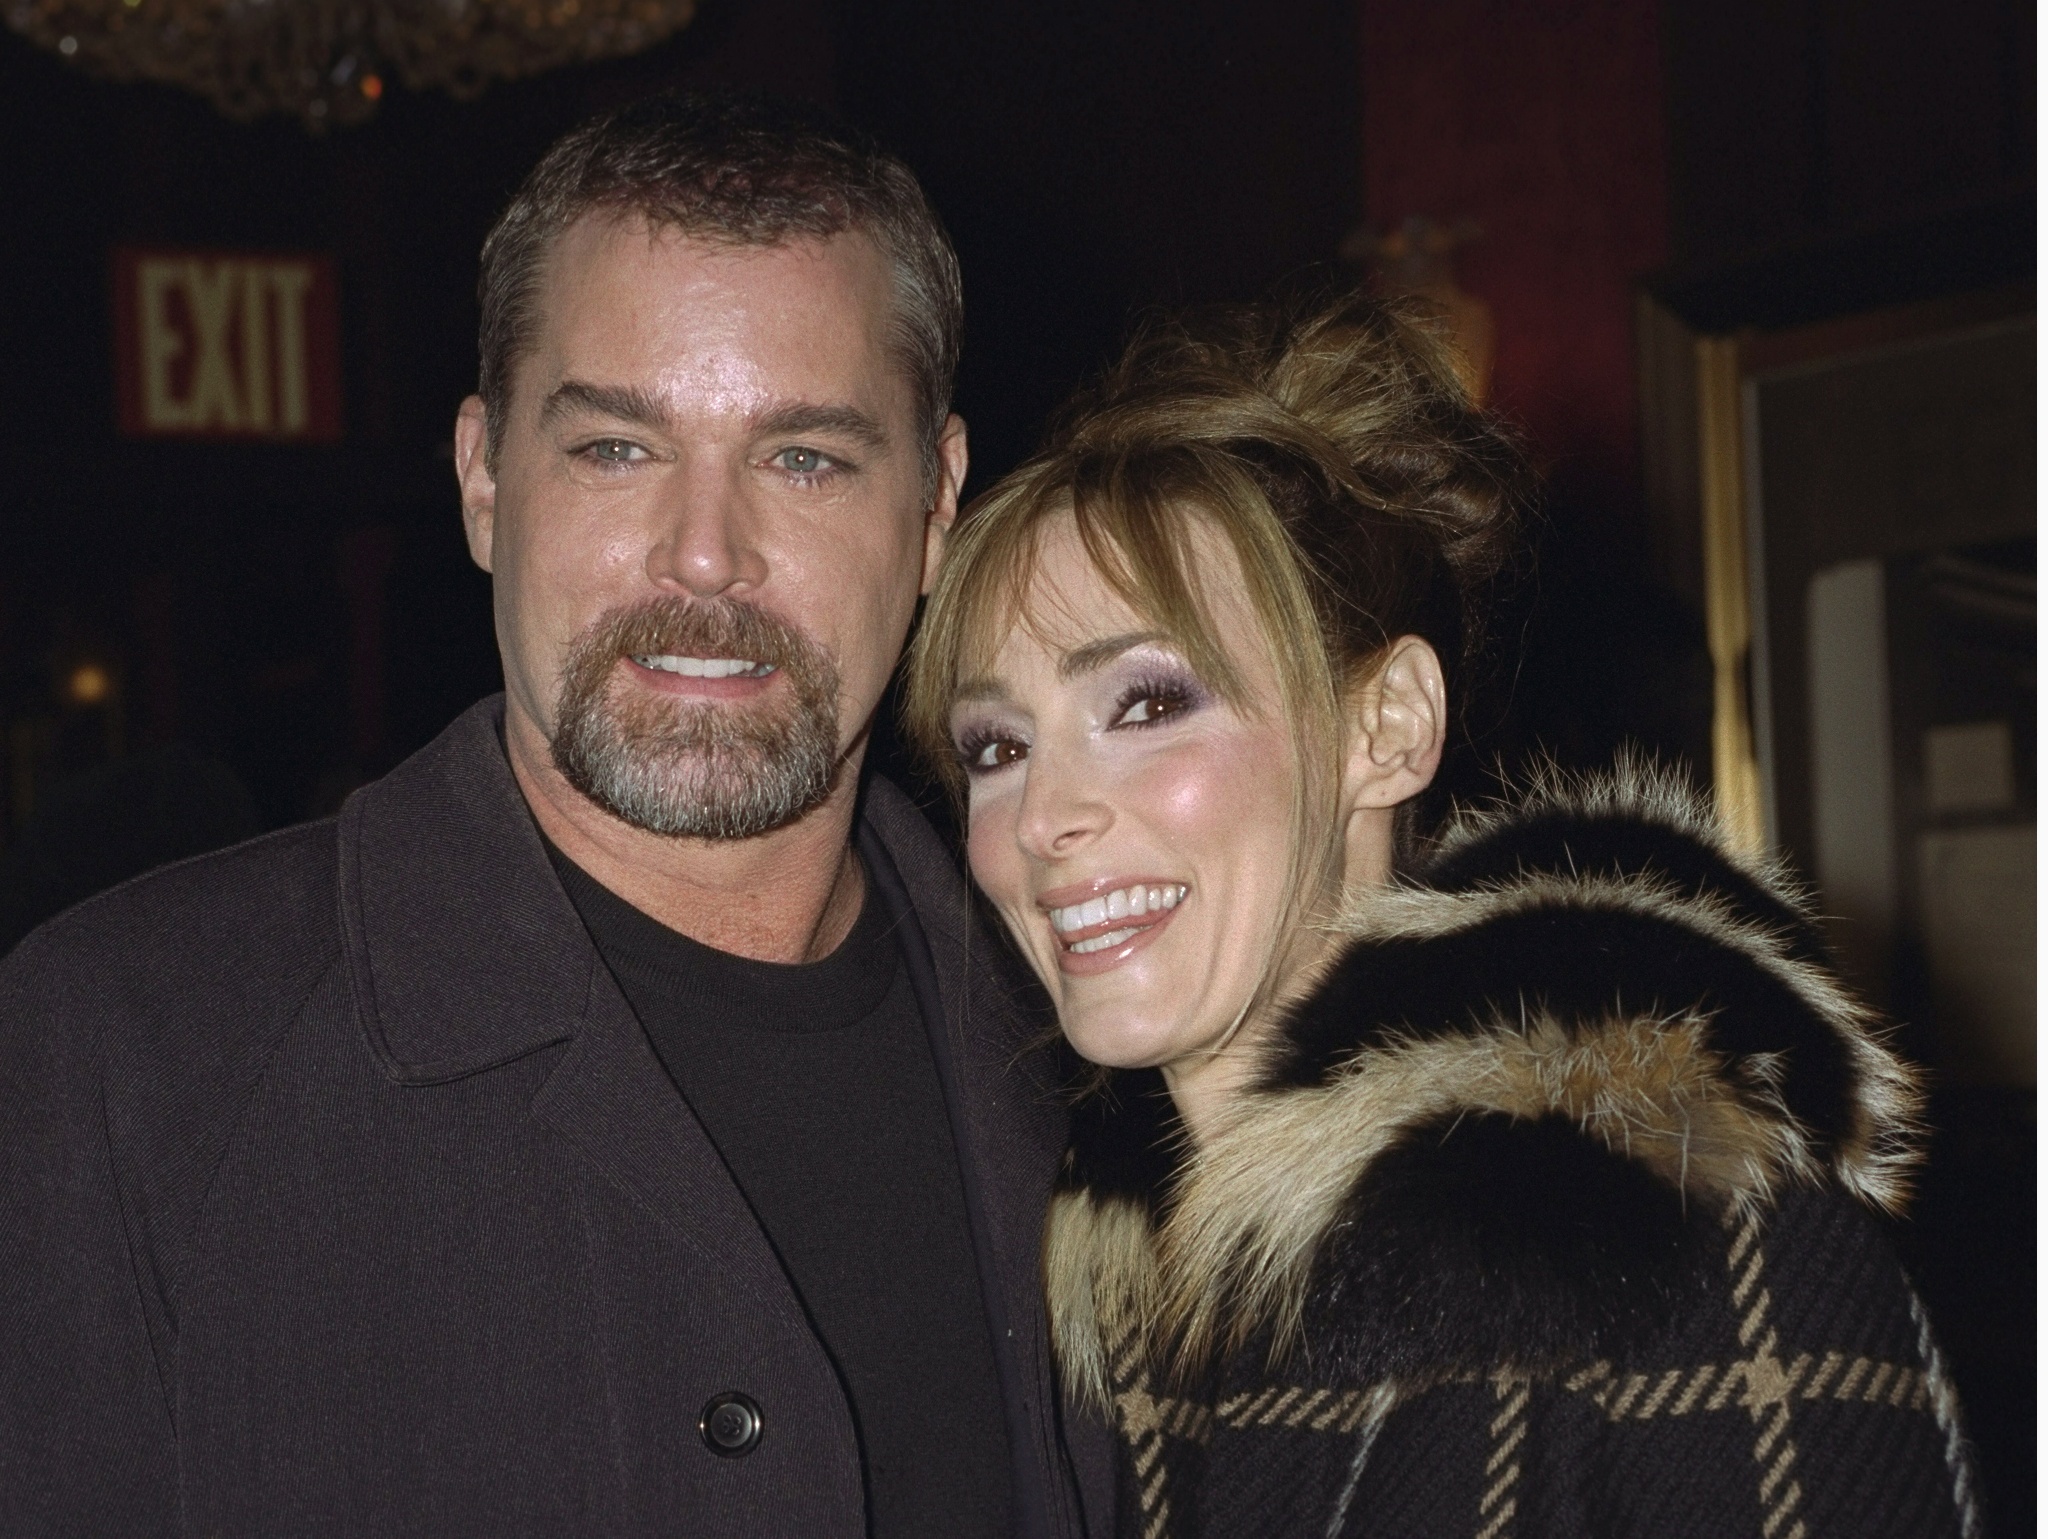 Ray Liotta and Michelle Grace at the New York premiere of the "Hannibal" at the Ziegfeld Theater, on January 1, 2000. | Source: Getty Images